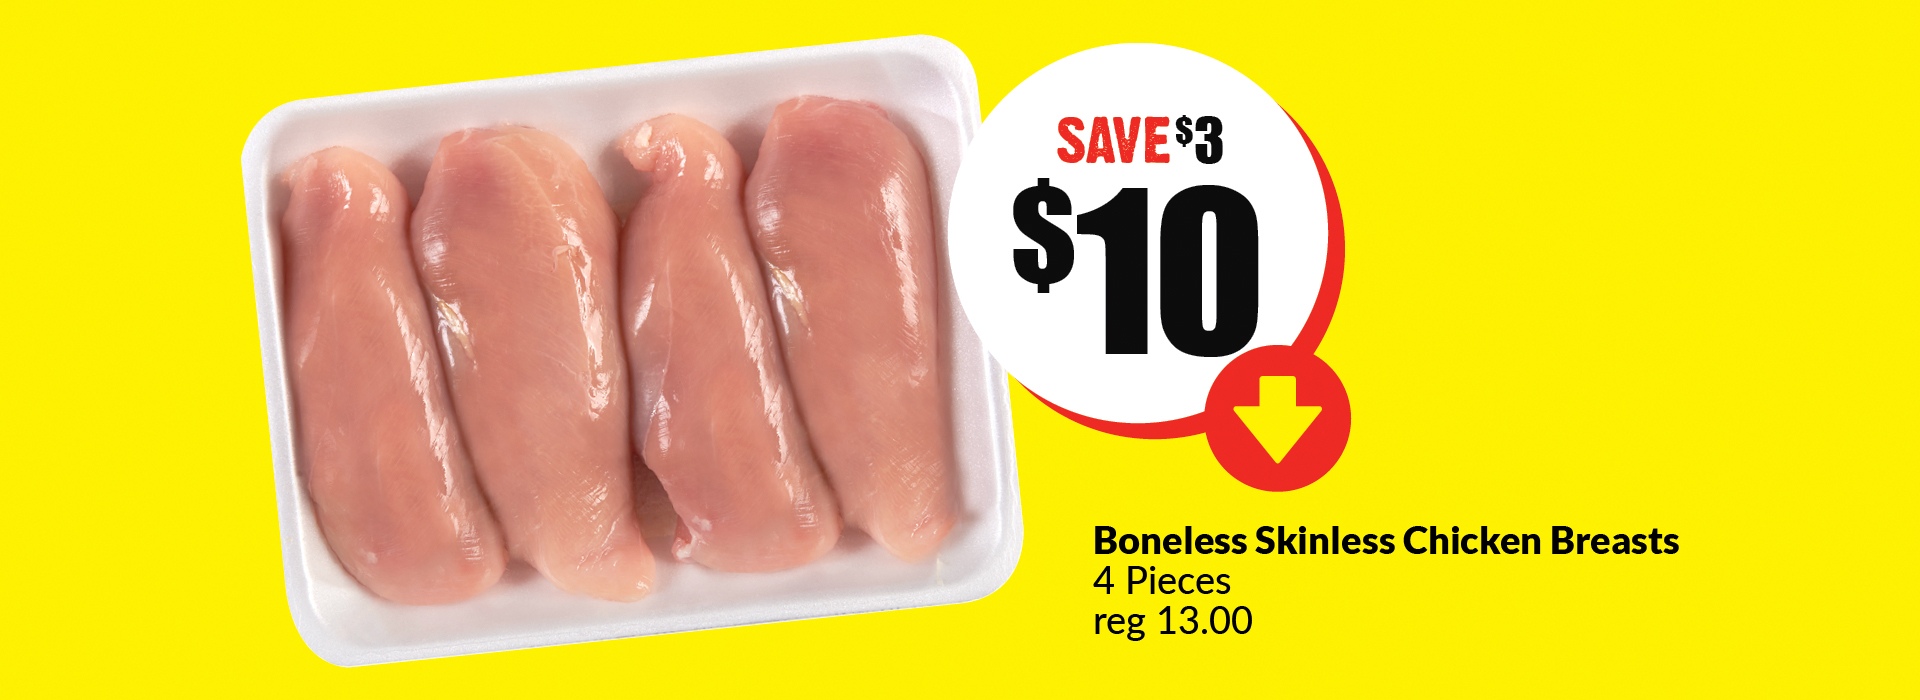 The following image contains the text, " Boneless Skinless Chicken Breasts 4 Pieces reg 13.00. Get them at just $10 and Save $3.